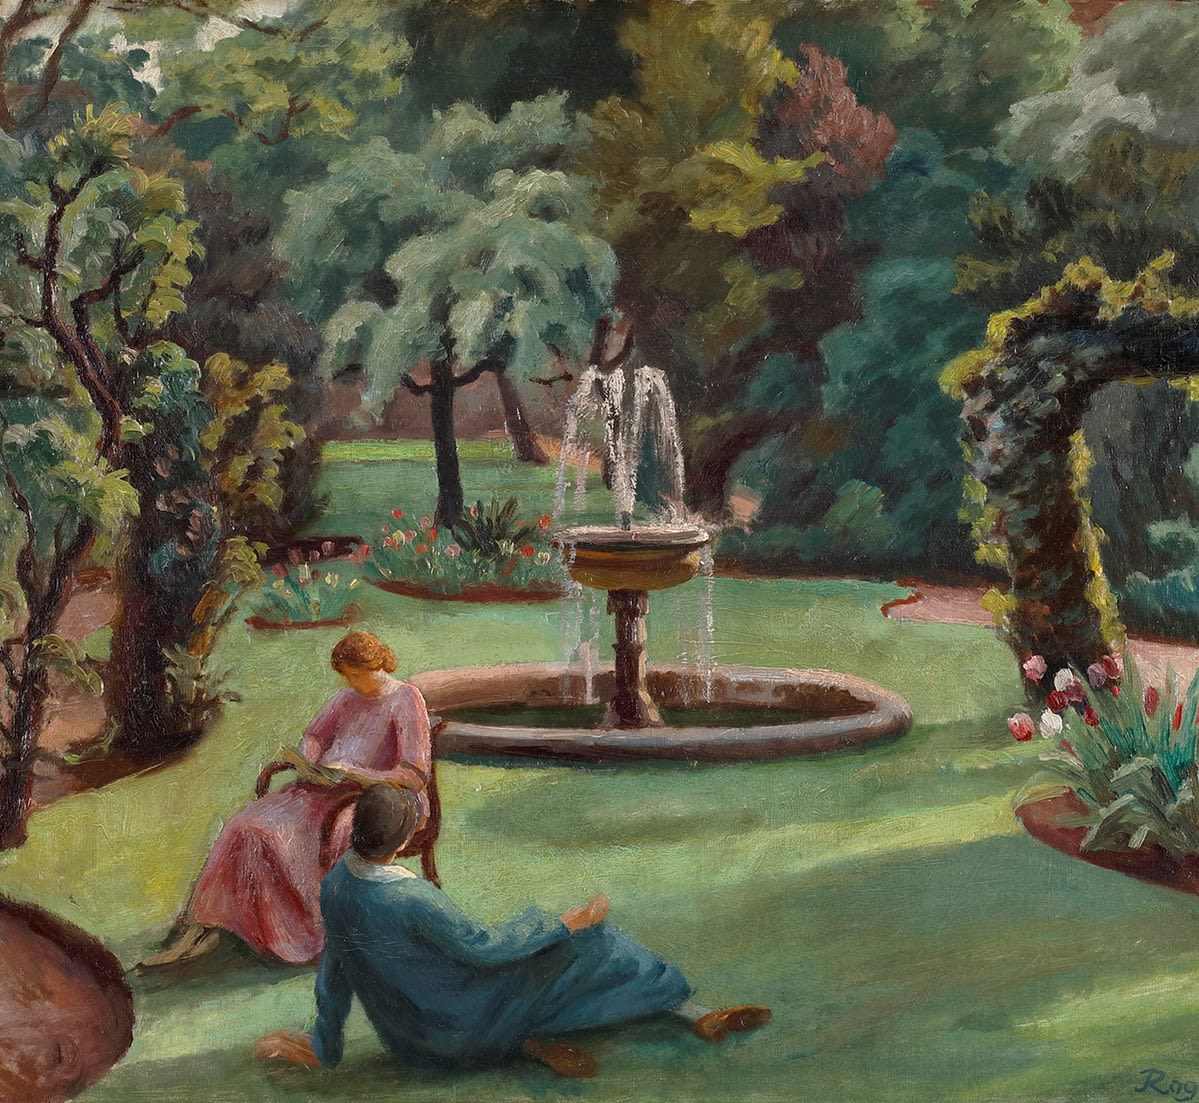 painting by roger fry at newington house two figures sit in the foreground against a background of a fountain garden flowers and trees